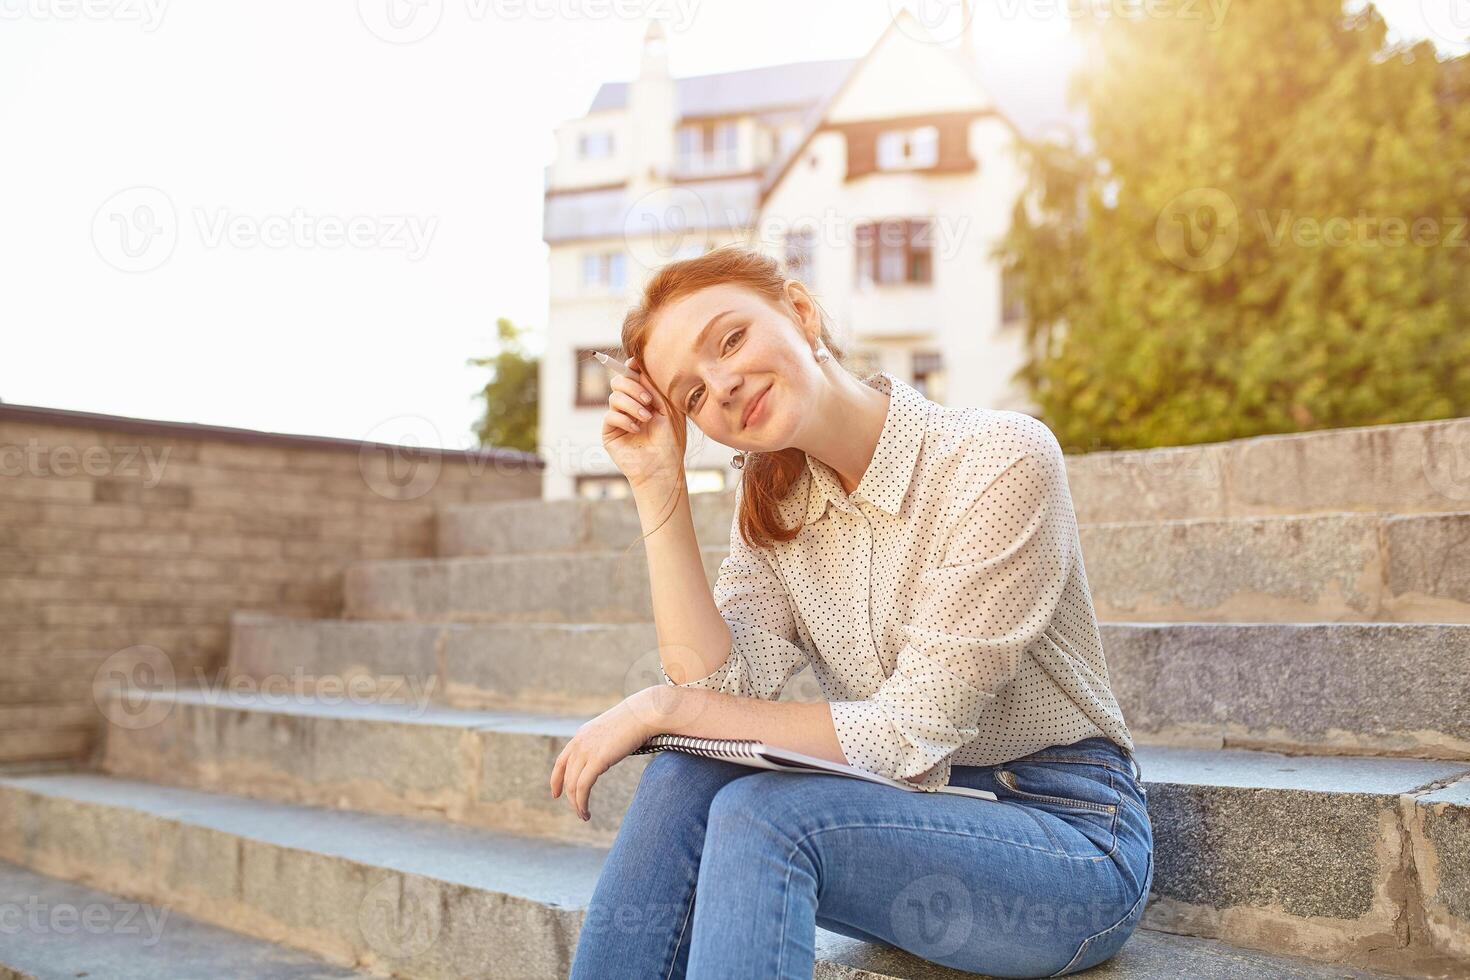 young beautiful student writes an essay in her notebook sitting on the steps stairs outdoor Red-haired girl with freckles photo